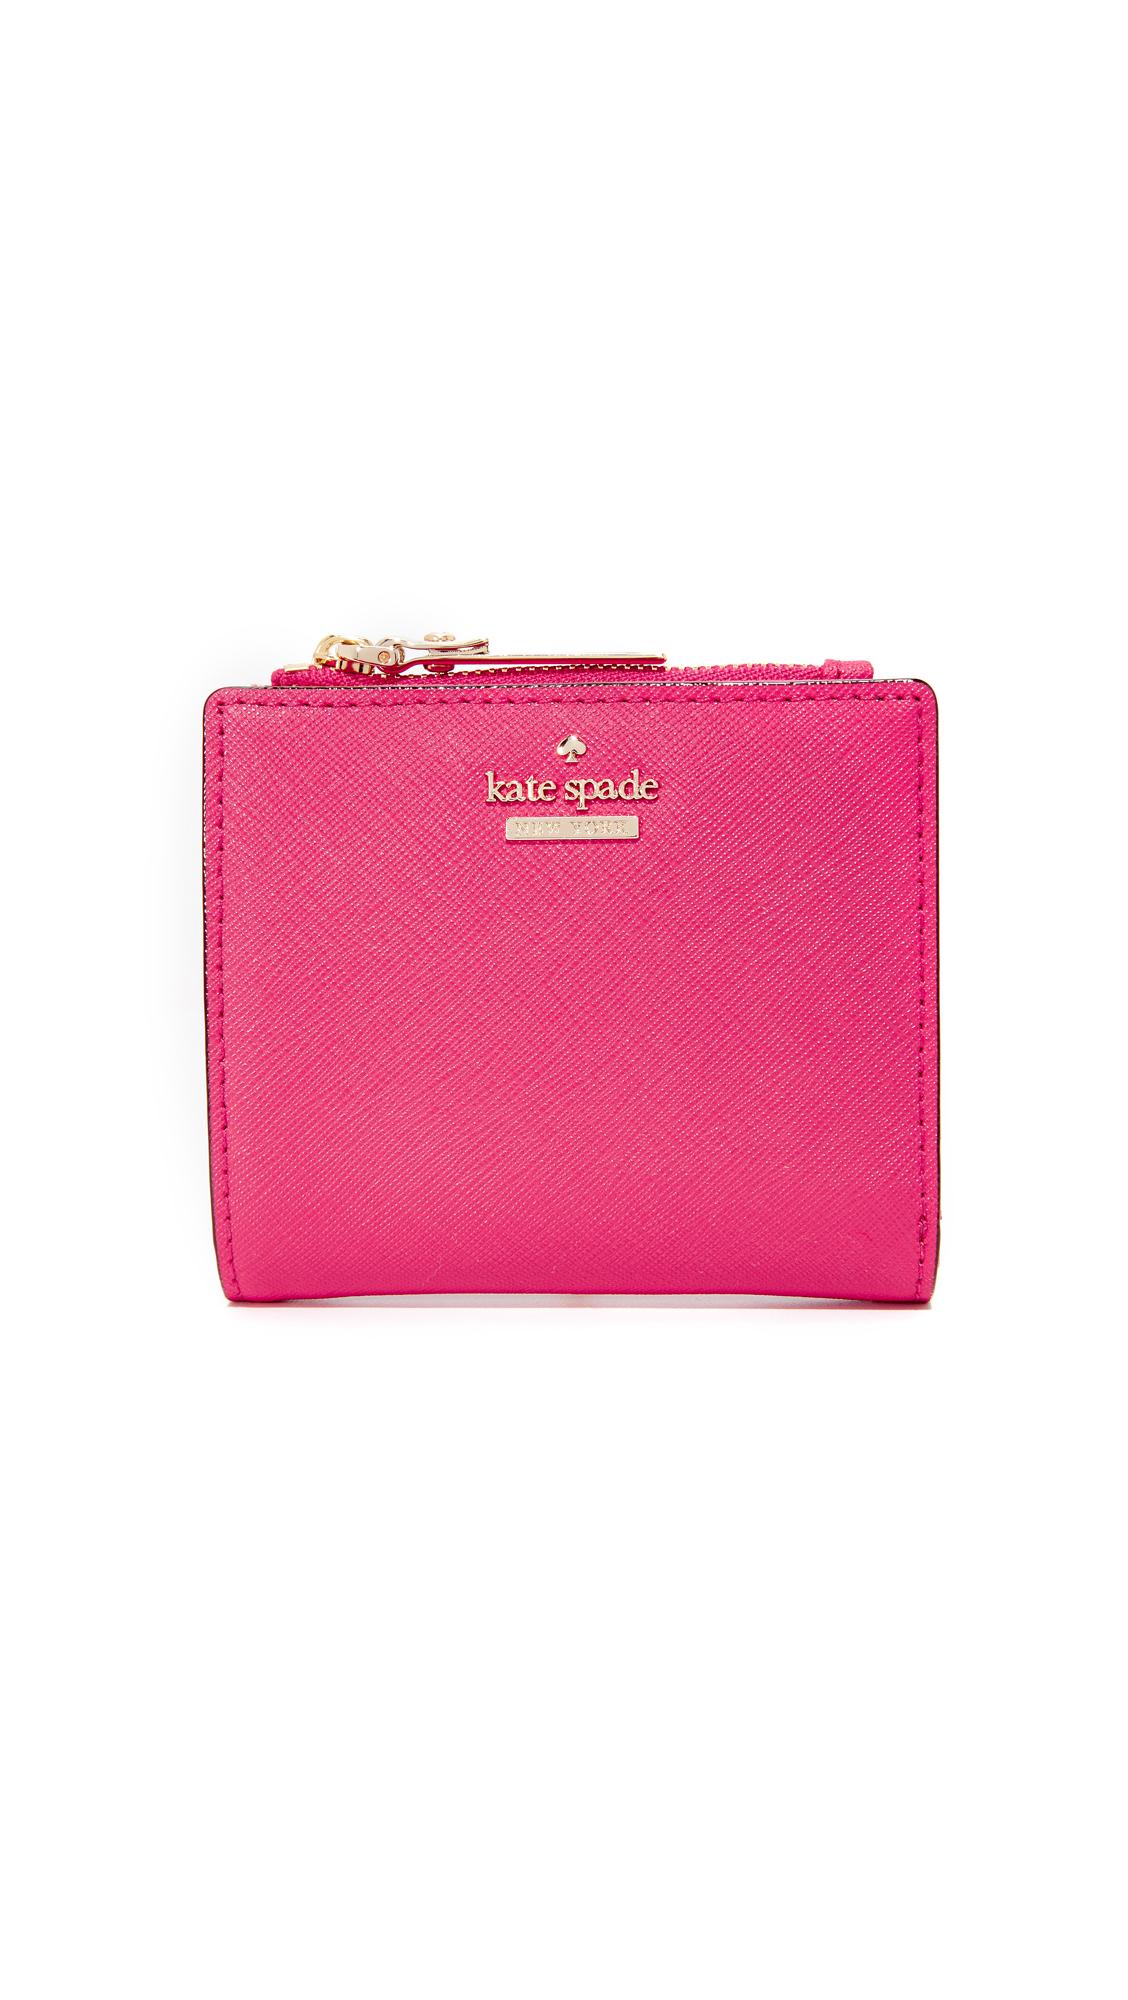 Kate Spade Small Wallet Purse For Women Size | semashow.com